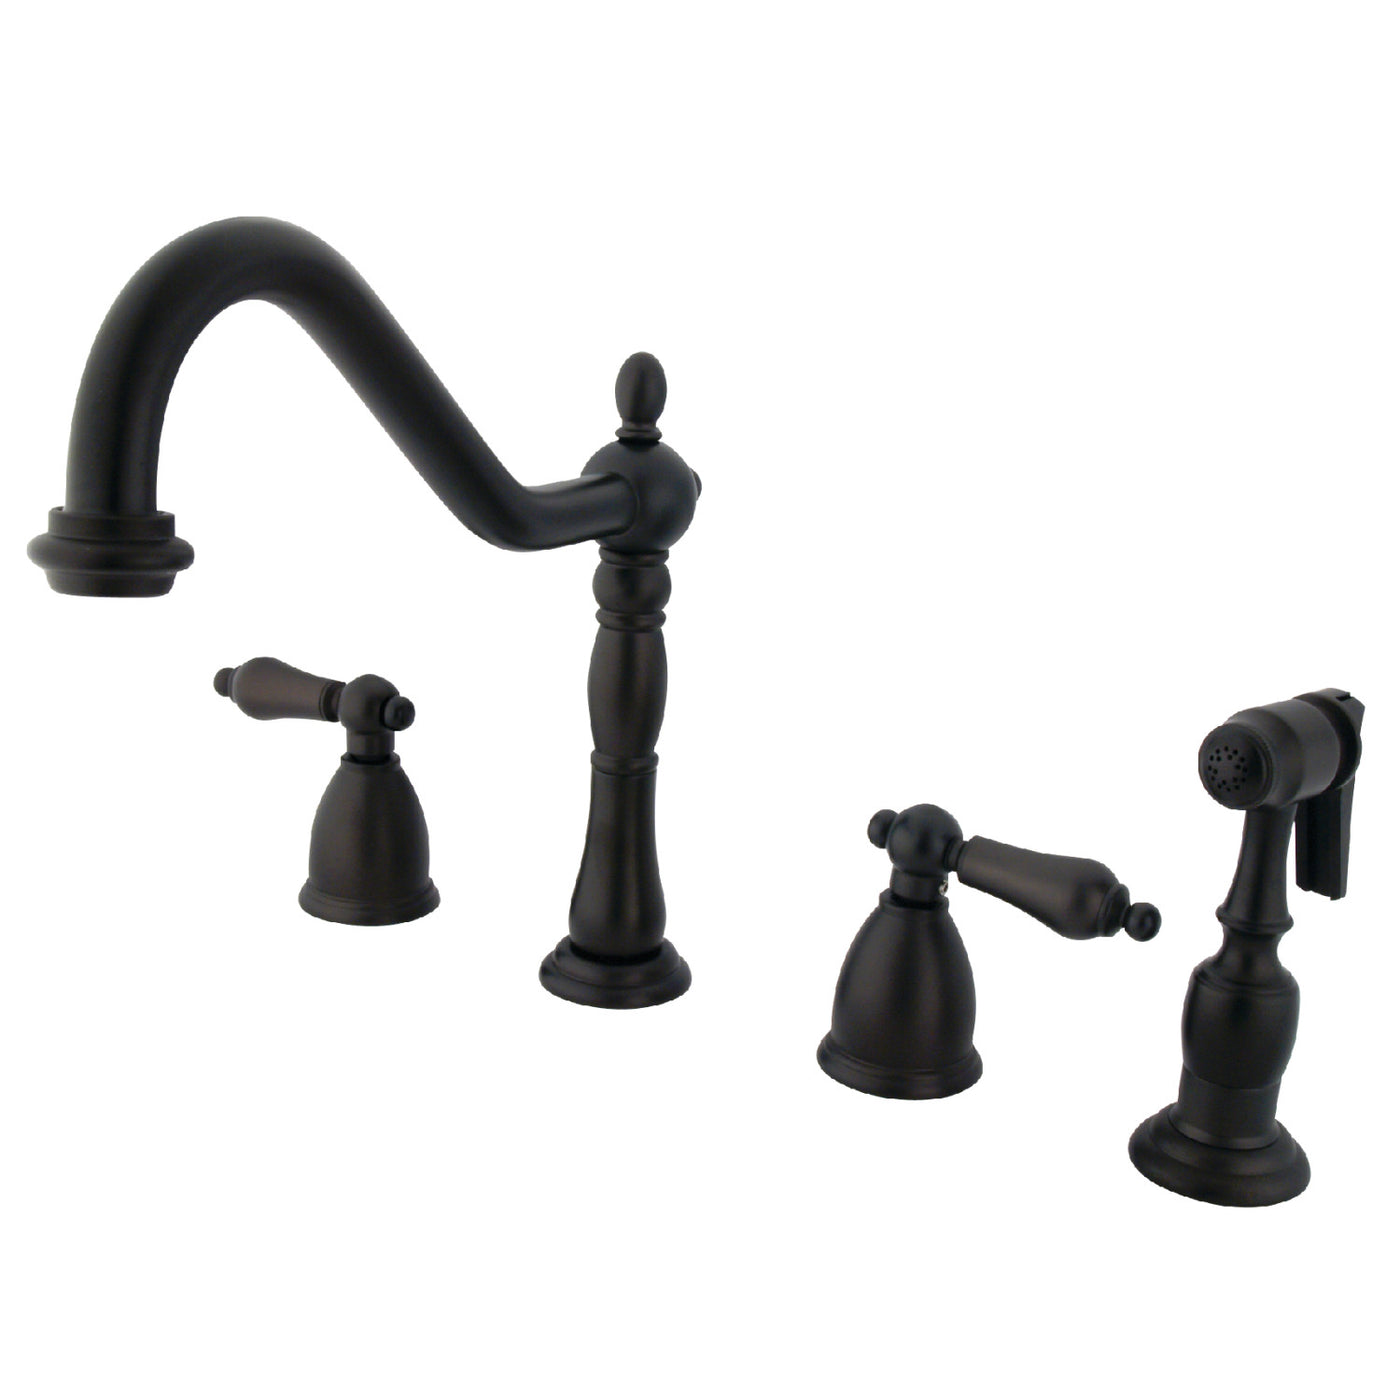 Elements of Design EB1795ALBS Widespread Kitchen Faucet with Brass Sprayer, Oil Rubbed Bronze